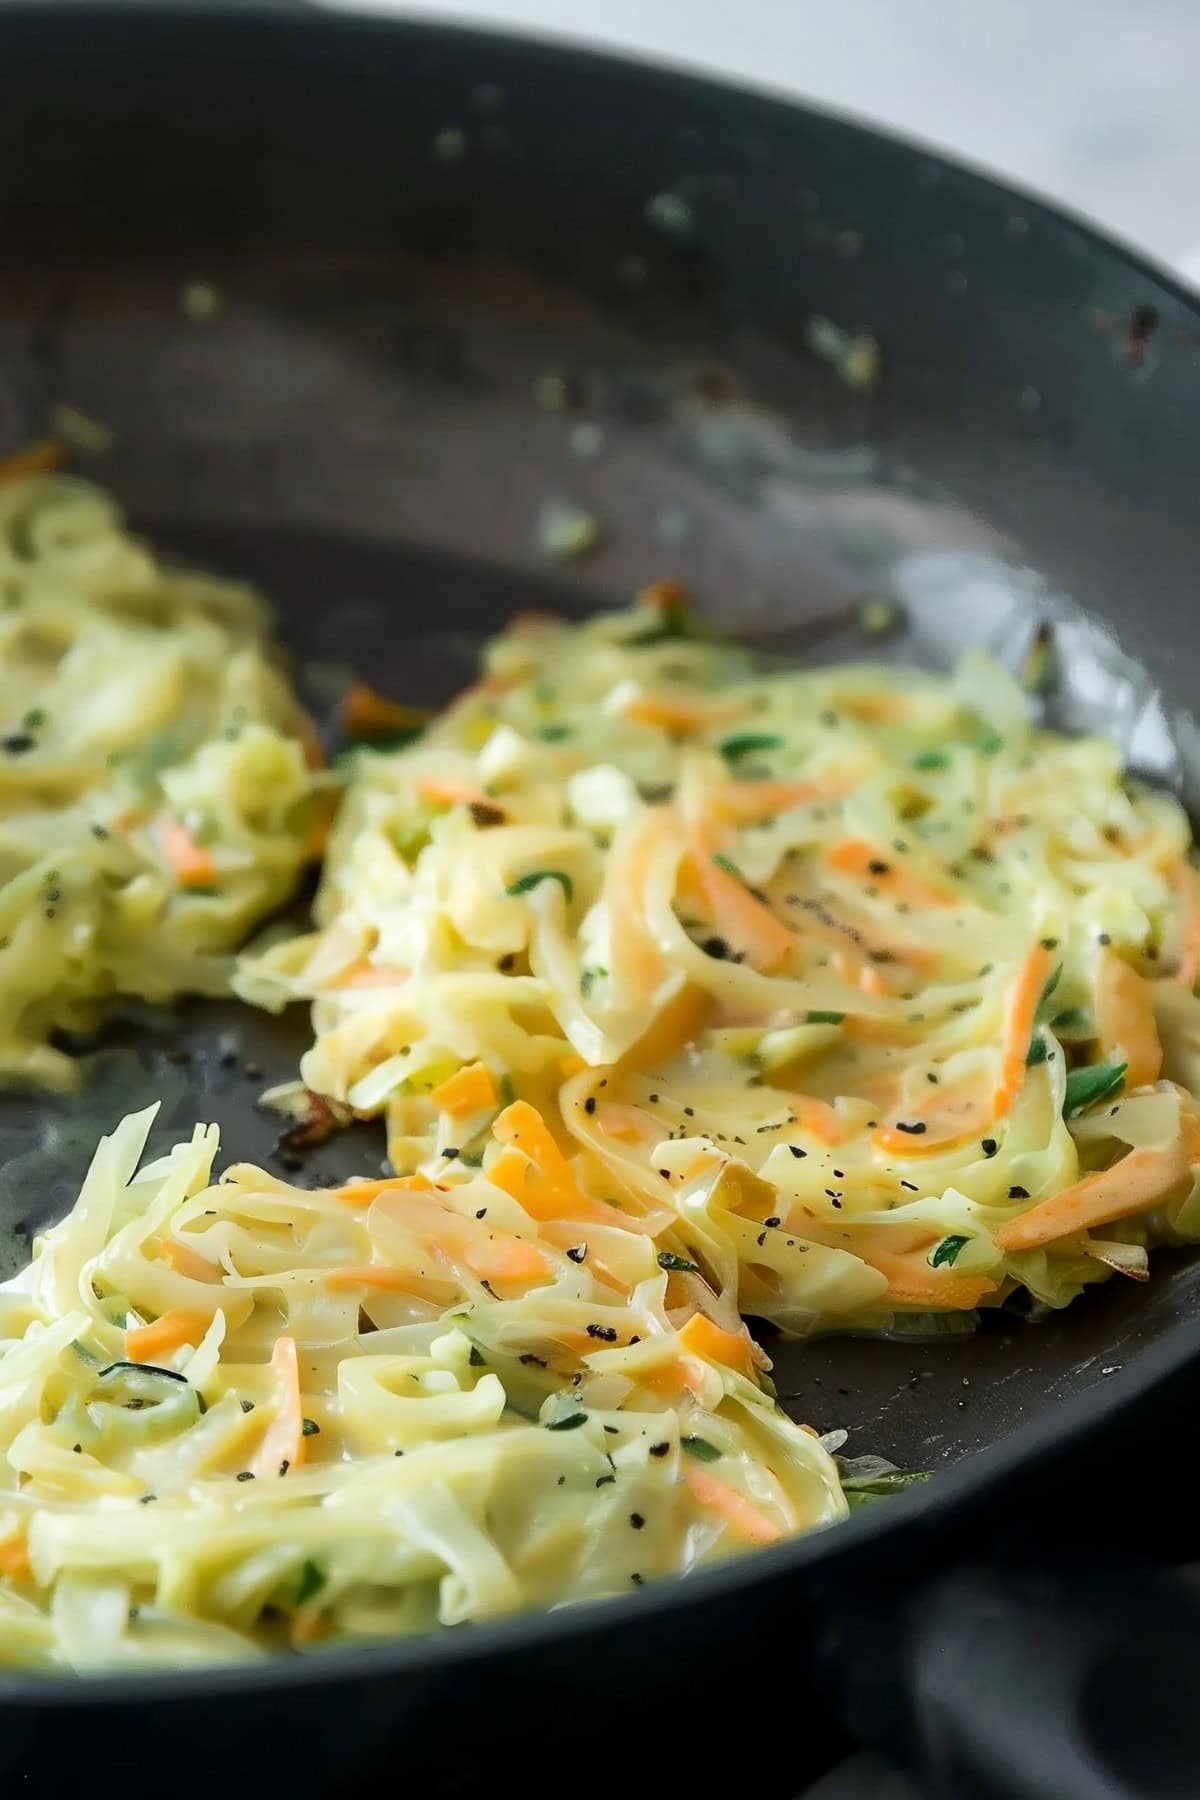 Battered cabbage and carrot fritters cooked in a black skillet